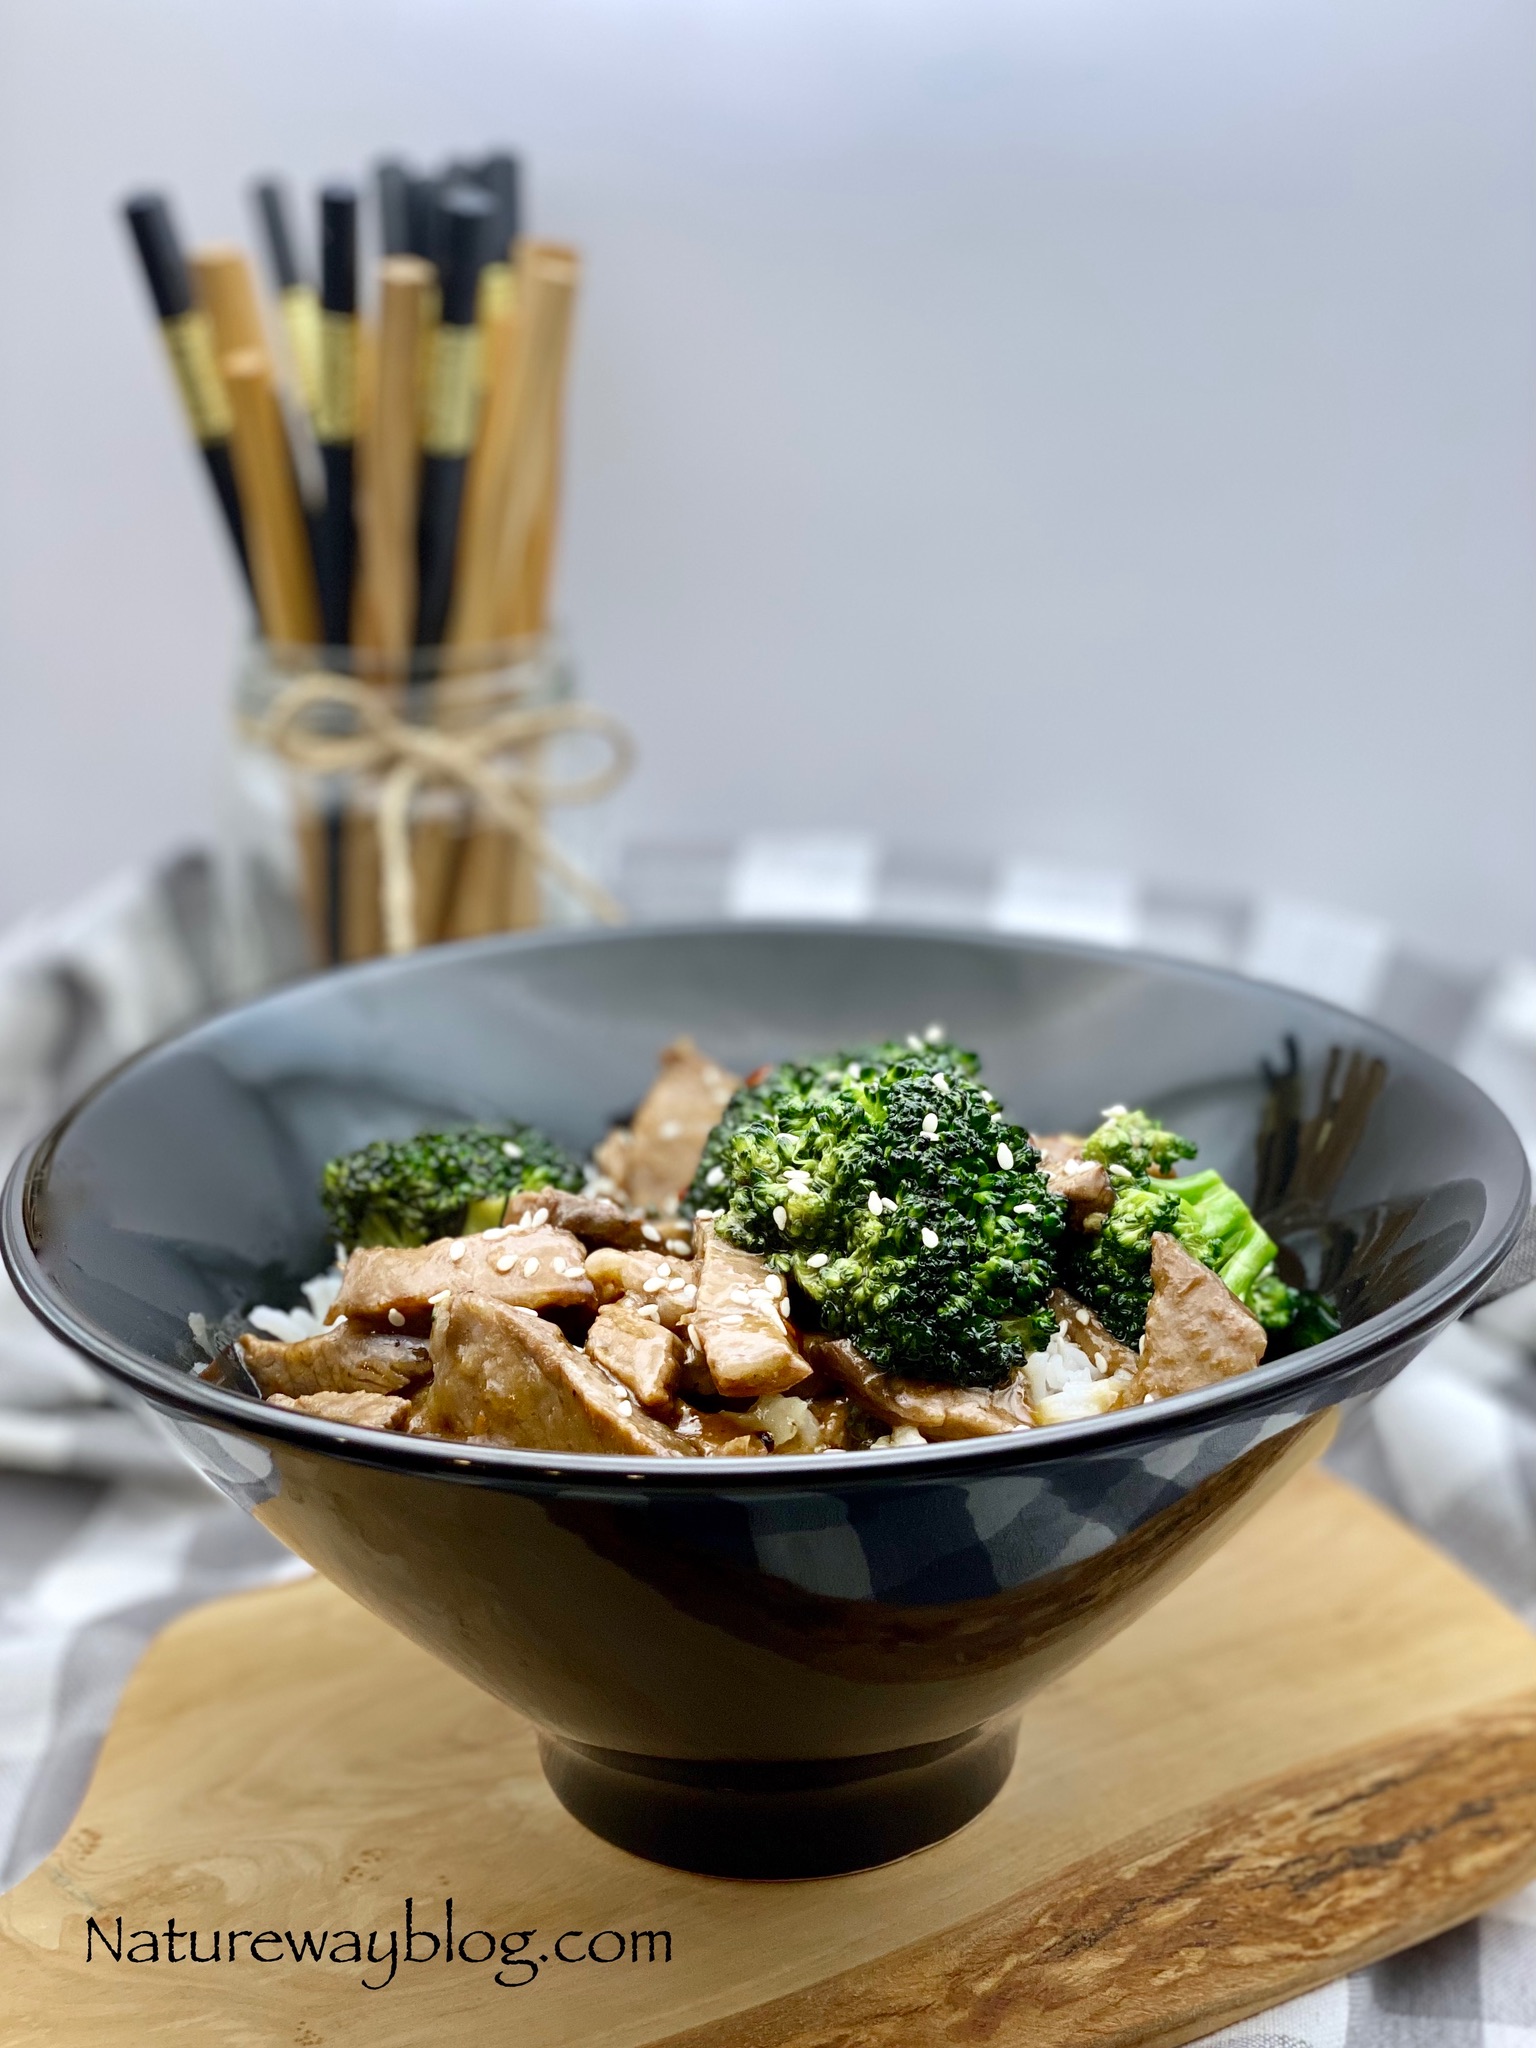 Breaking in my new @hexclad Wok with scrumptious beef and broccoli! I